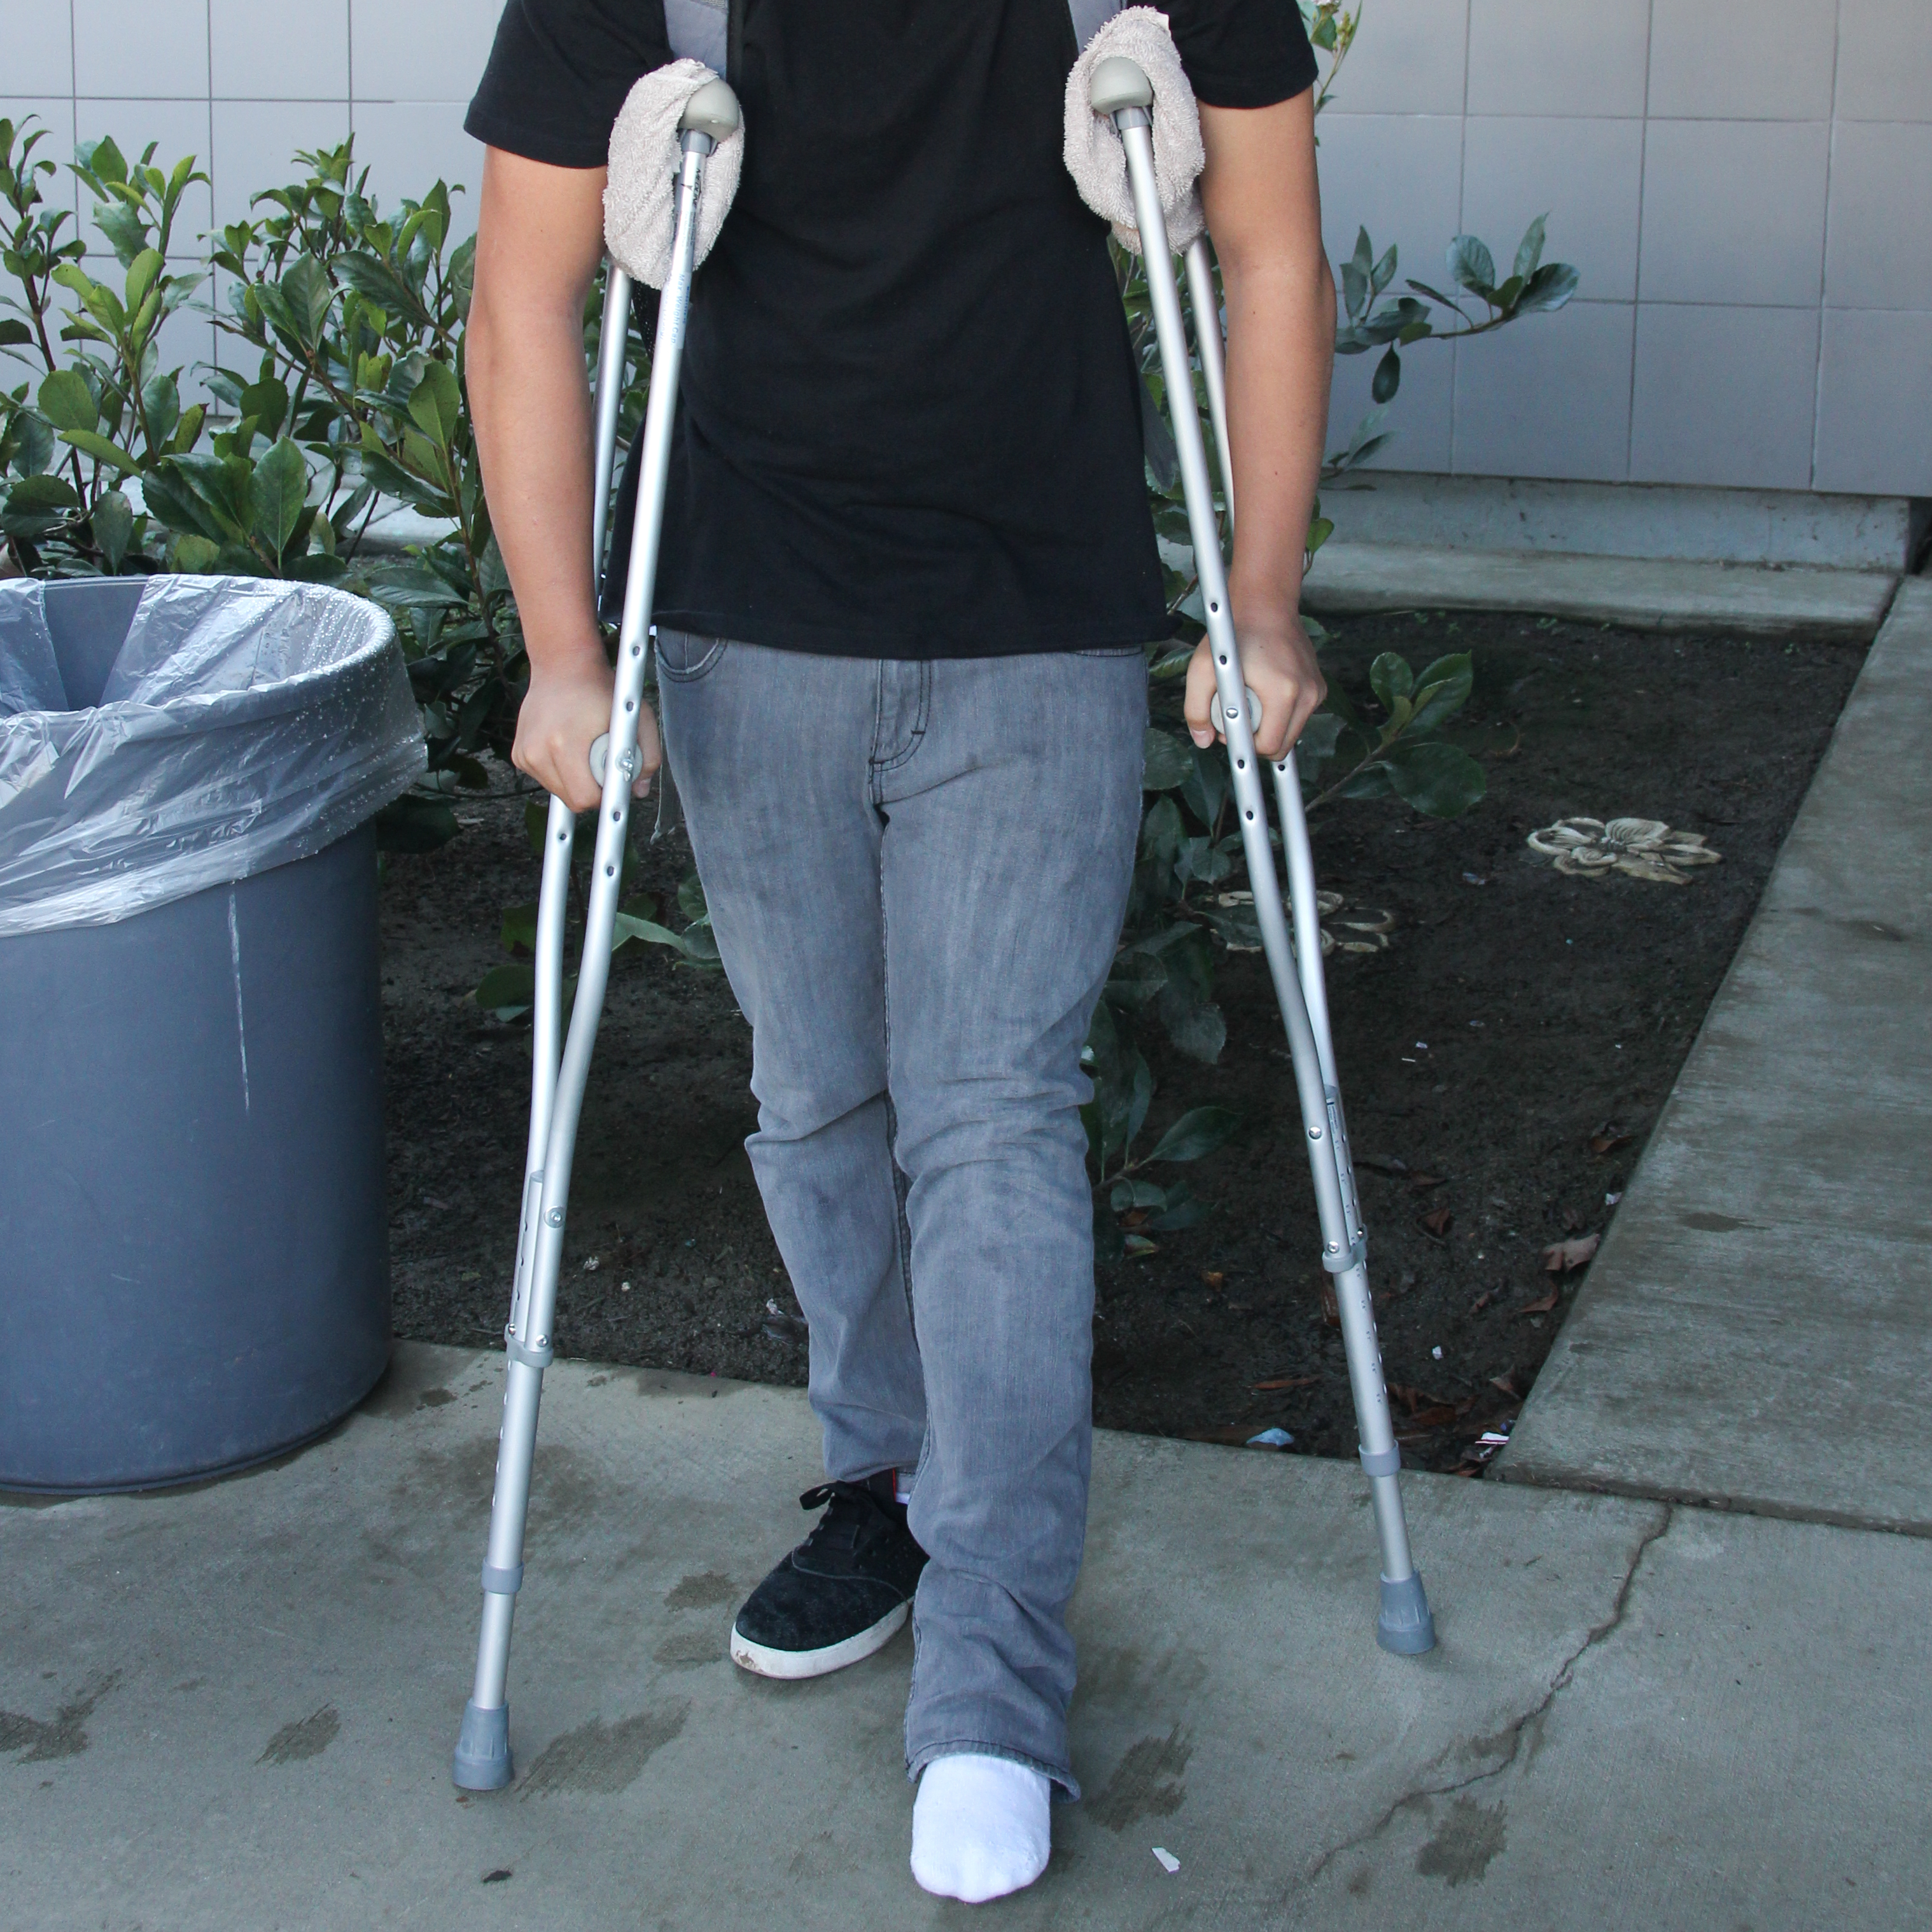 Many students become injured from playing sports in high school. Credit: Lauren Pedersen/The Foothill Dragon Press